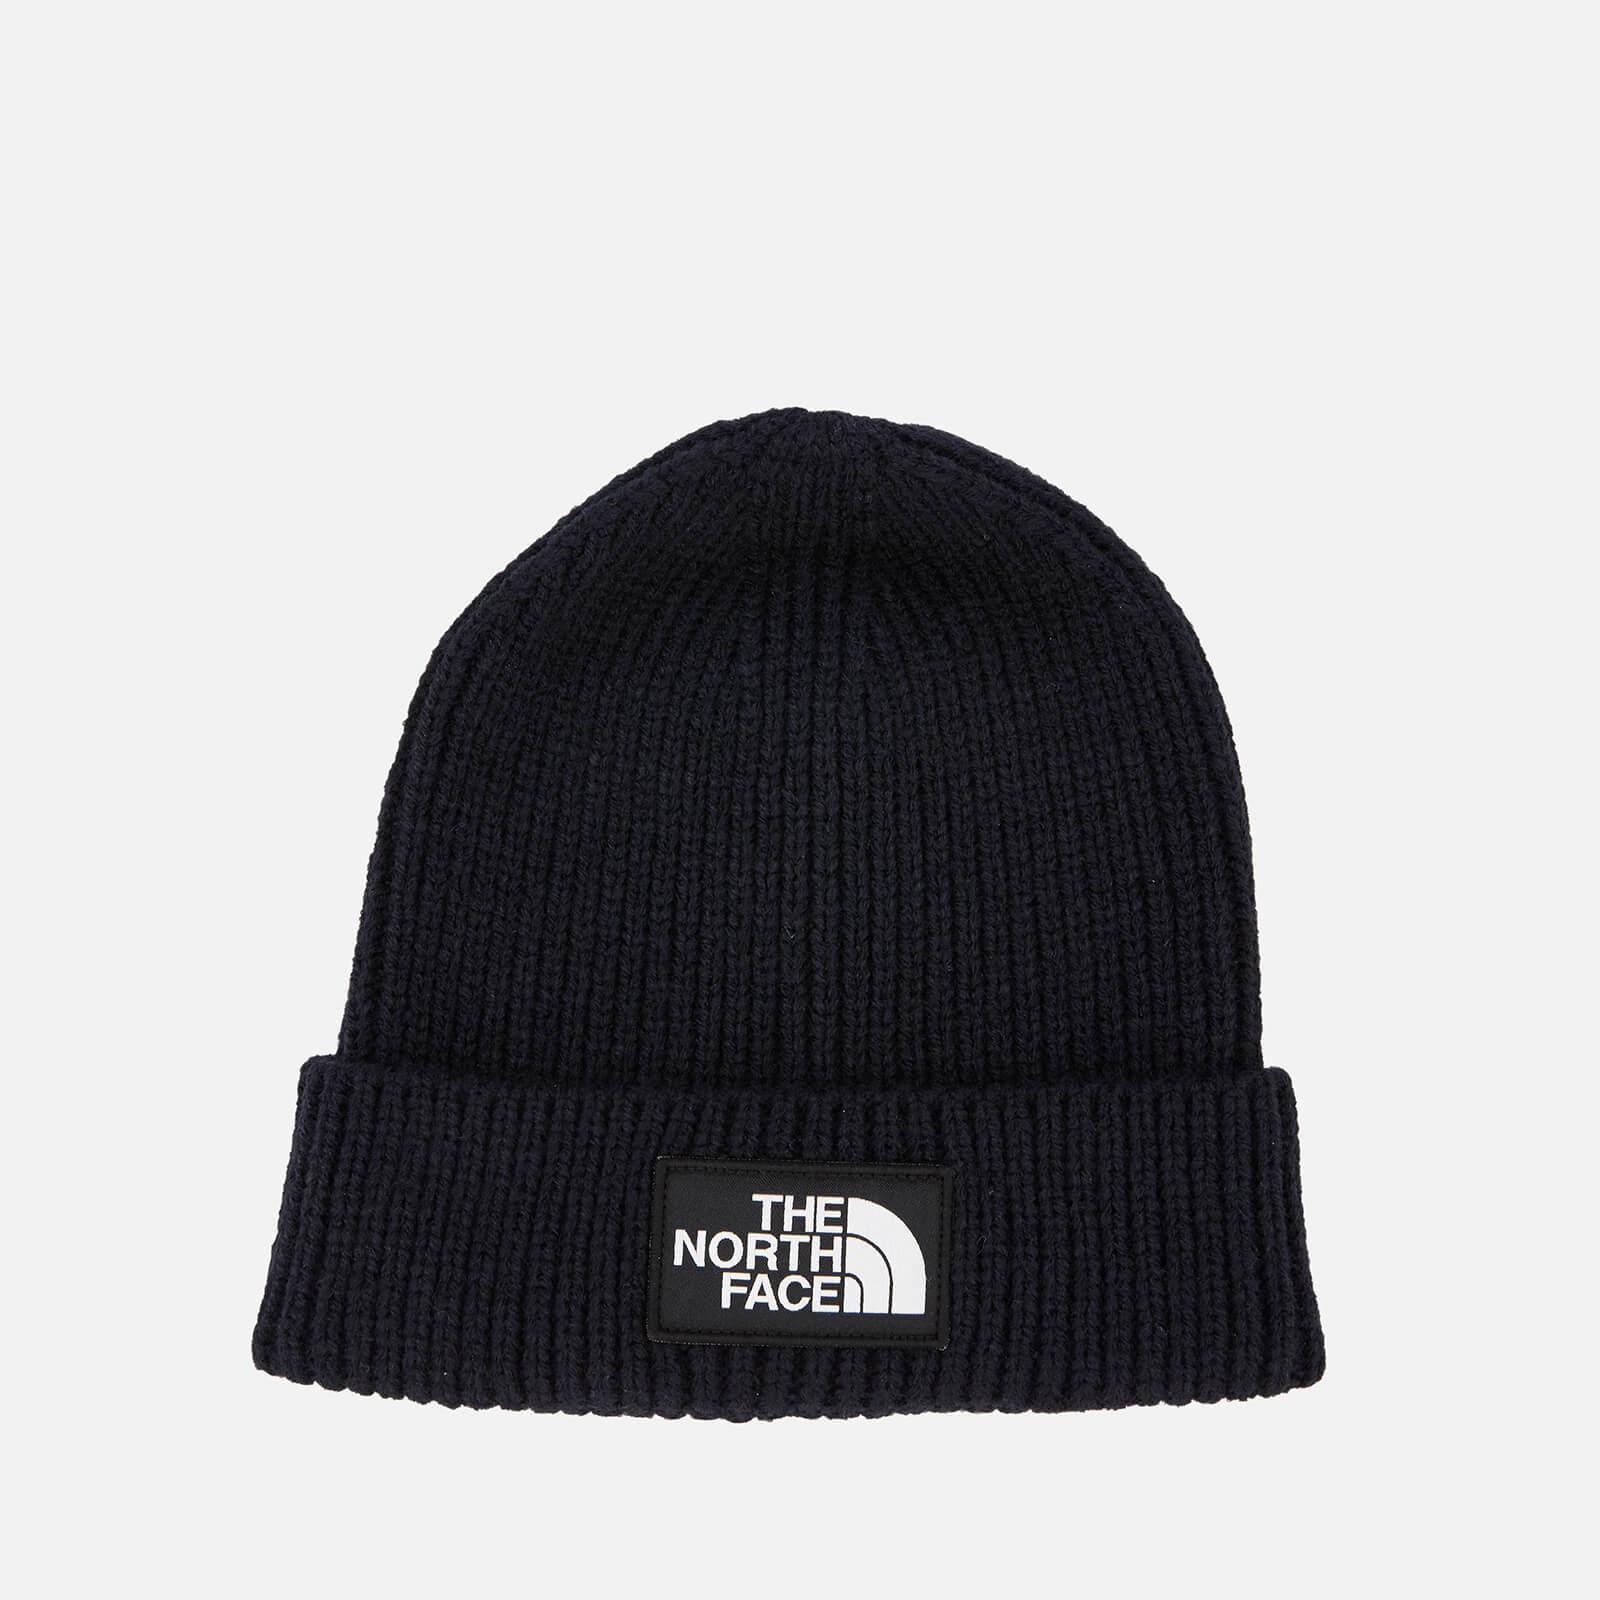 the north face hat black